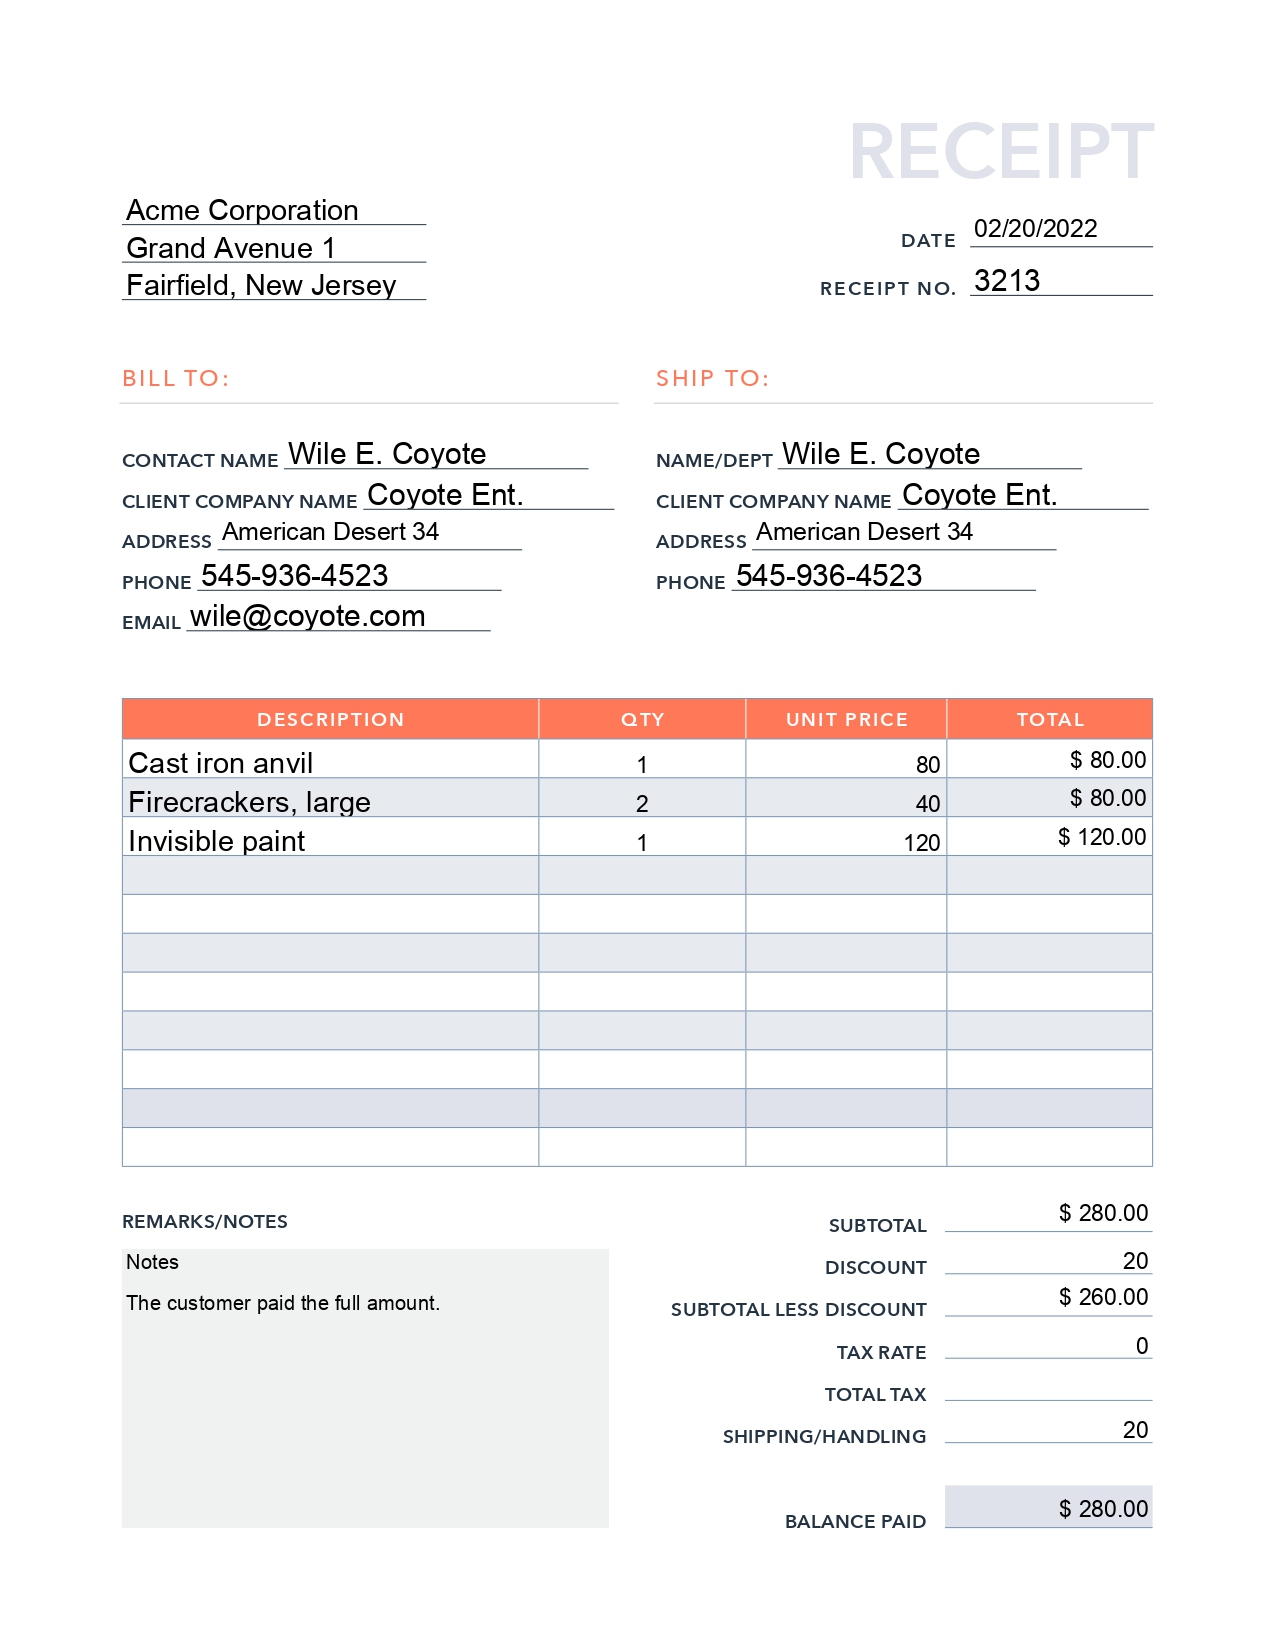 Receipt image is attached  Free receipt template, Receipt